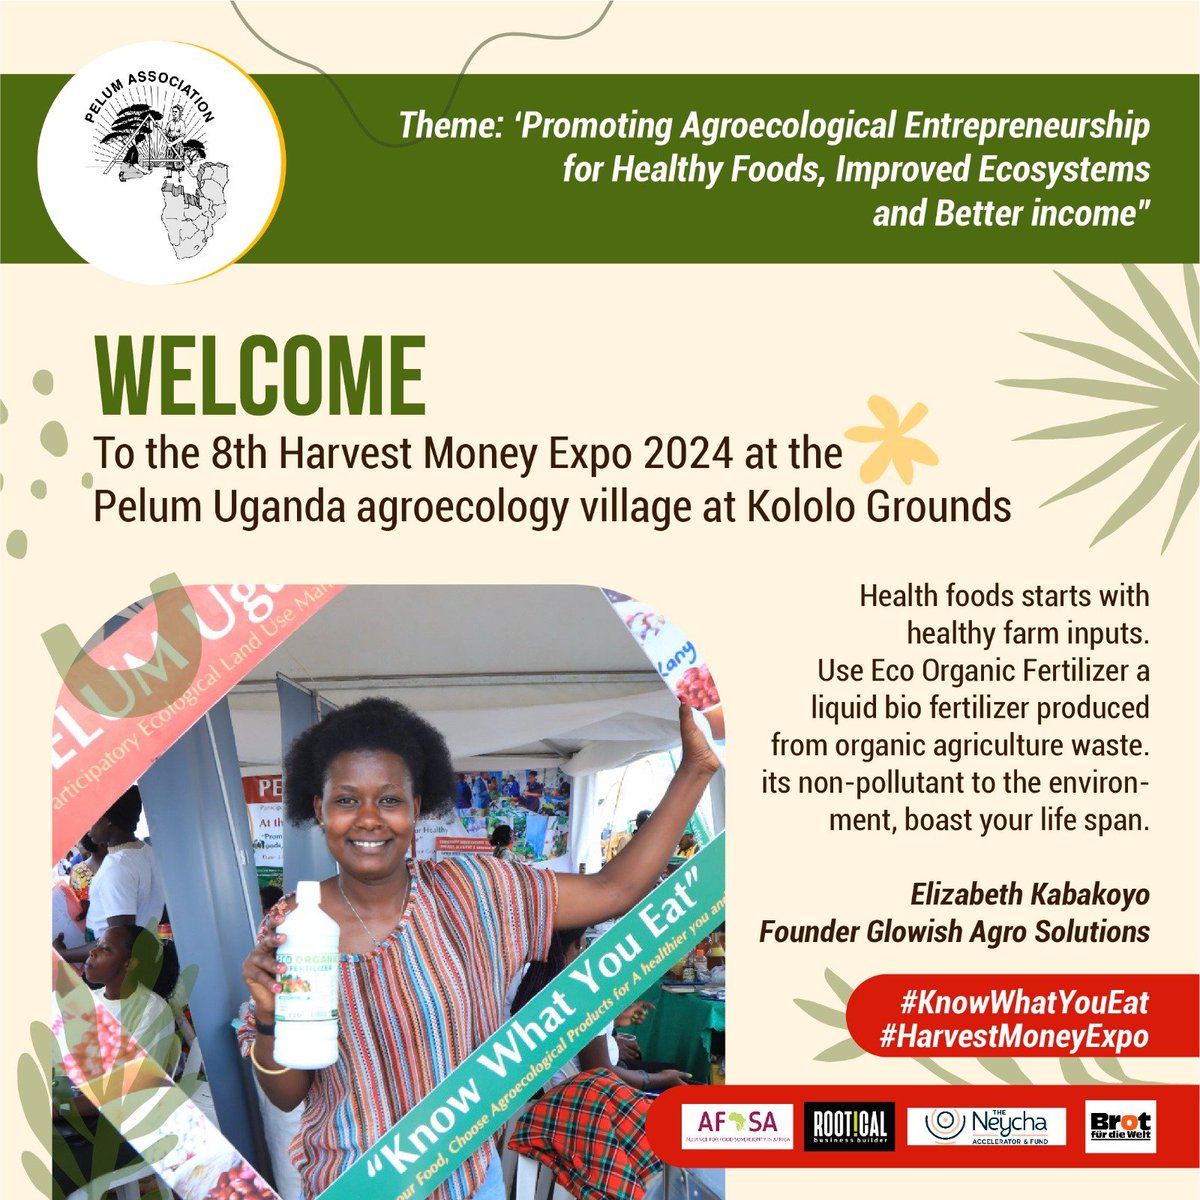 Health foods starts with healthy farm inputs.Use Eco Organic Fertilizer a liquid  bio fertilizer produced from organic agriculture waste-Elizabeth Kabakoyo Founder Glowish Agro Solutions
Visit the PELUM Uganda stall at Kololo grounds at the 
#HarvestMoneyExpo 
#KnowWhatYouEat